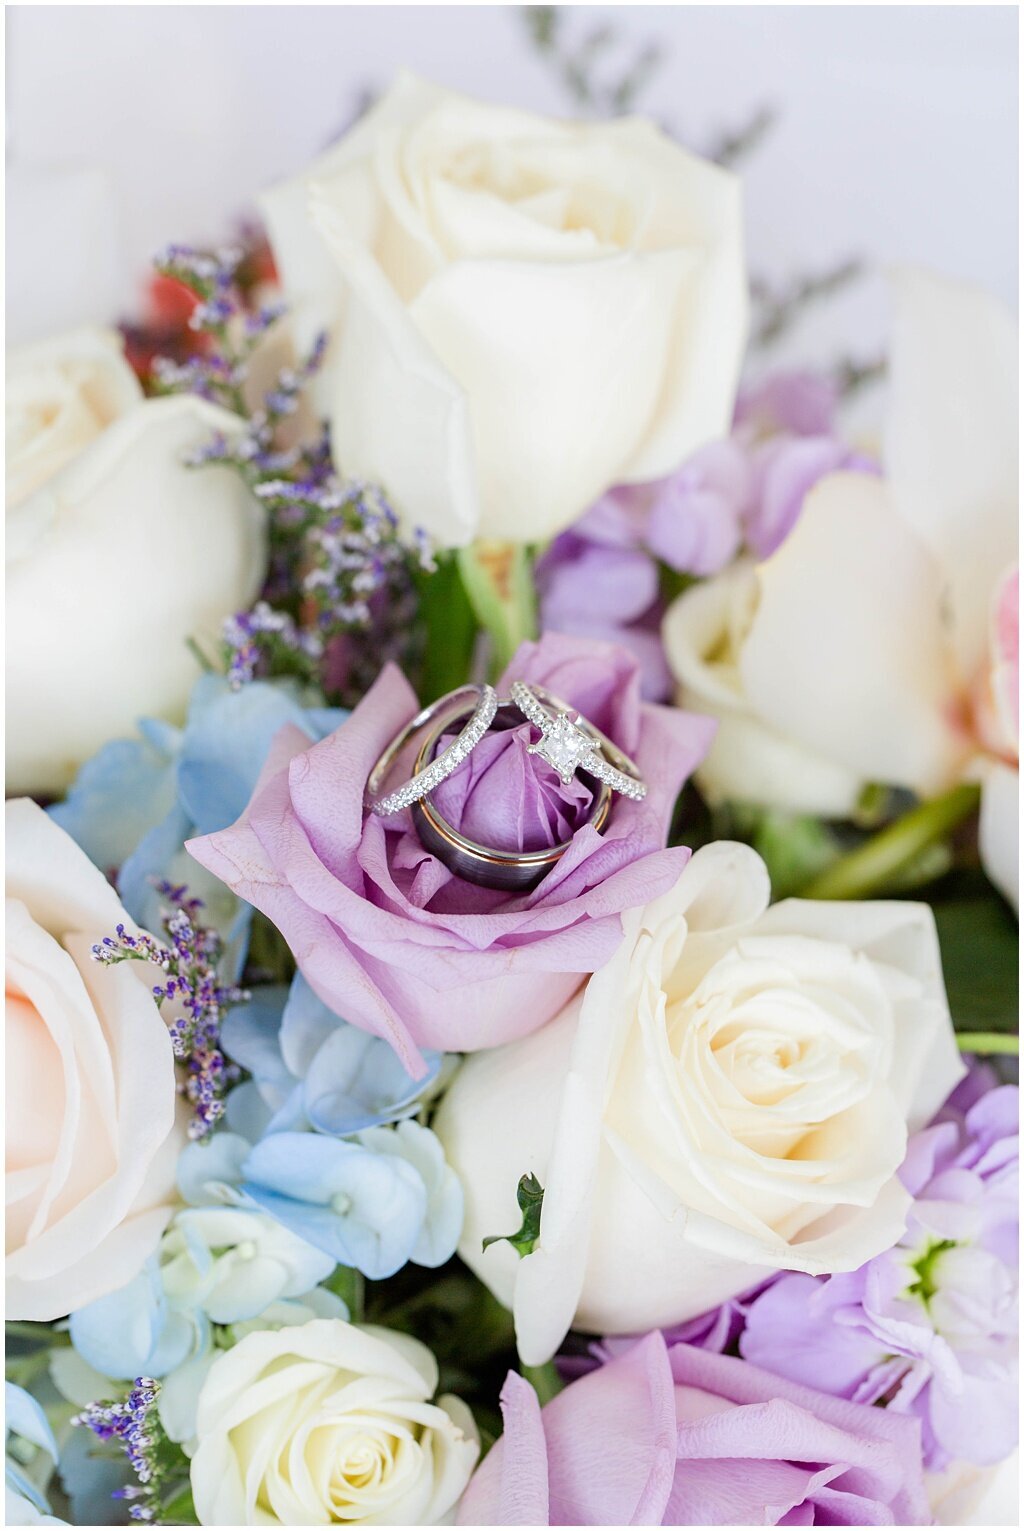 wedding rings with purple, white and blue flowers